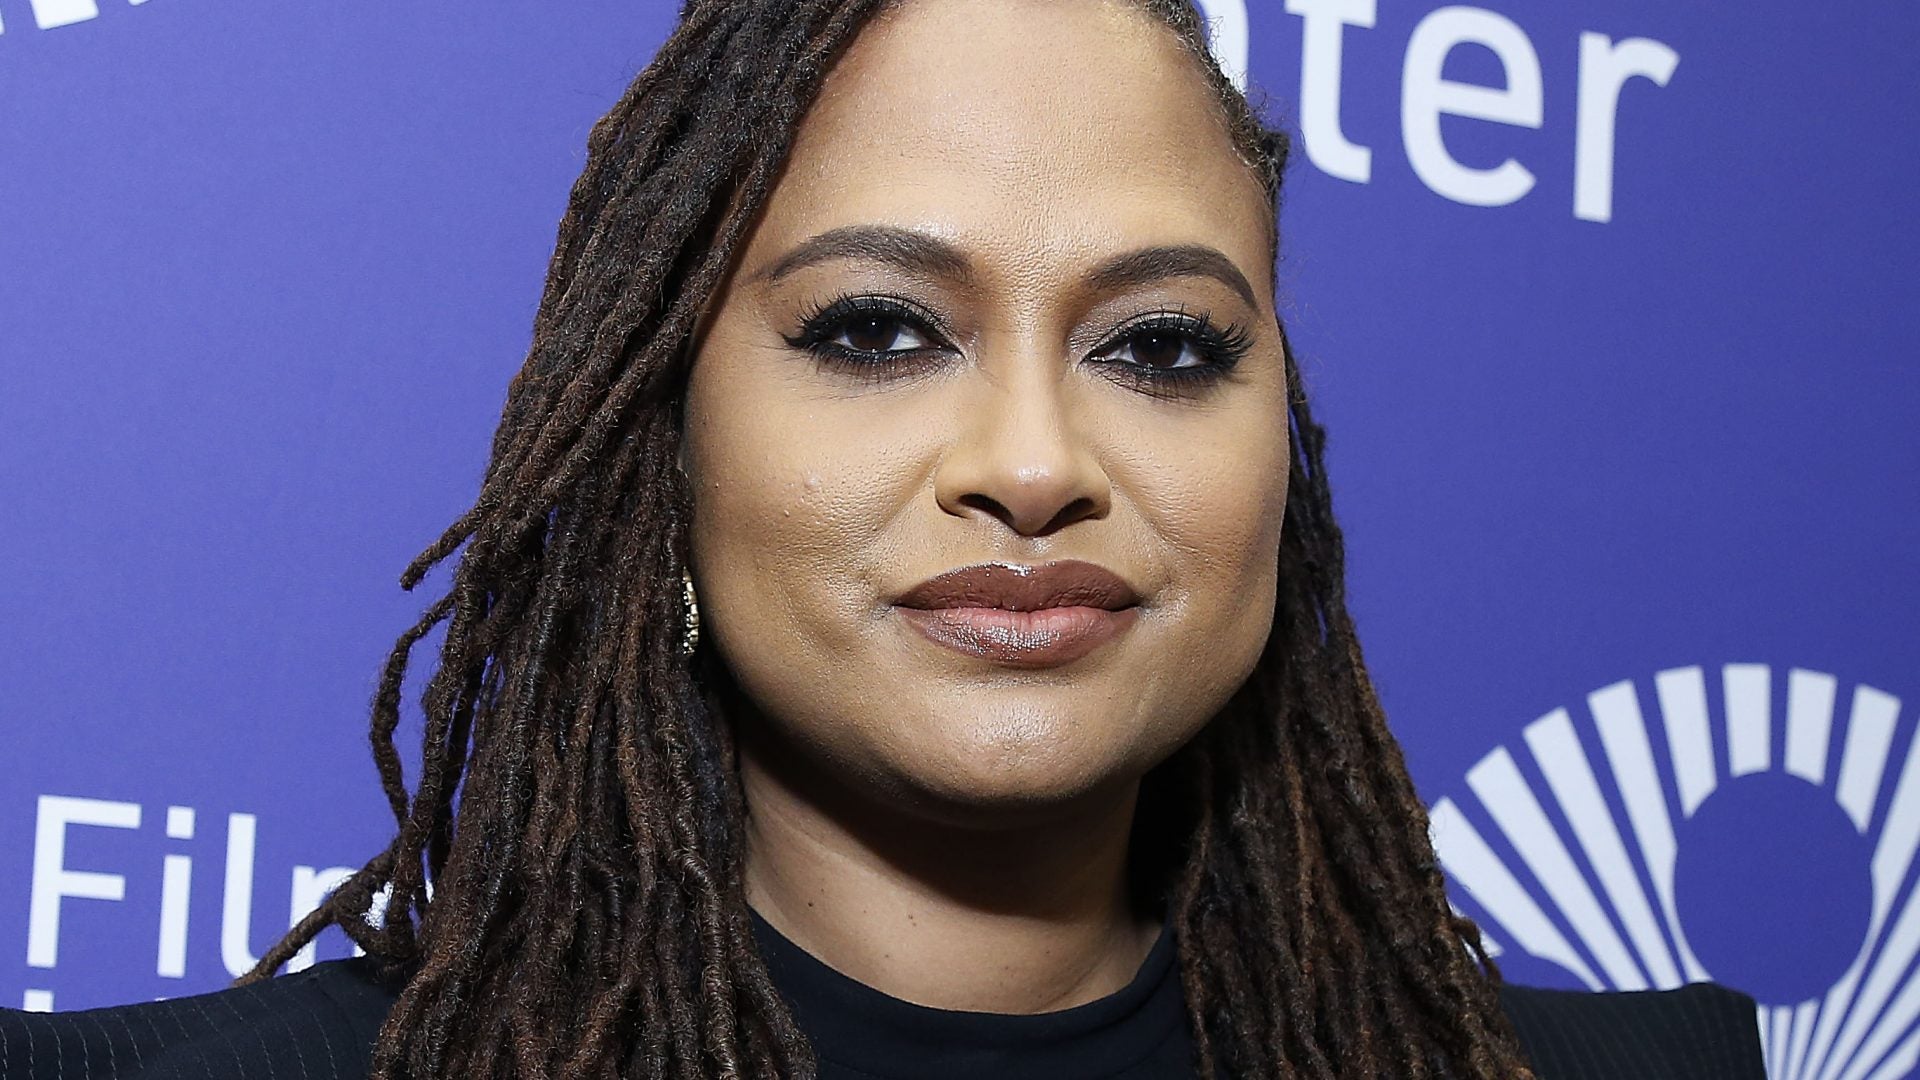 Ava DuVernay Shares Pressuring The HFPA Isn't About 'Acquiring Shiny Things,' It's About Equity